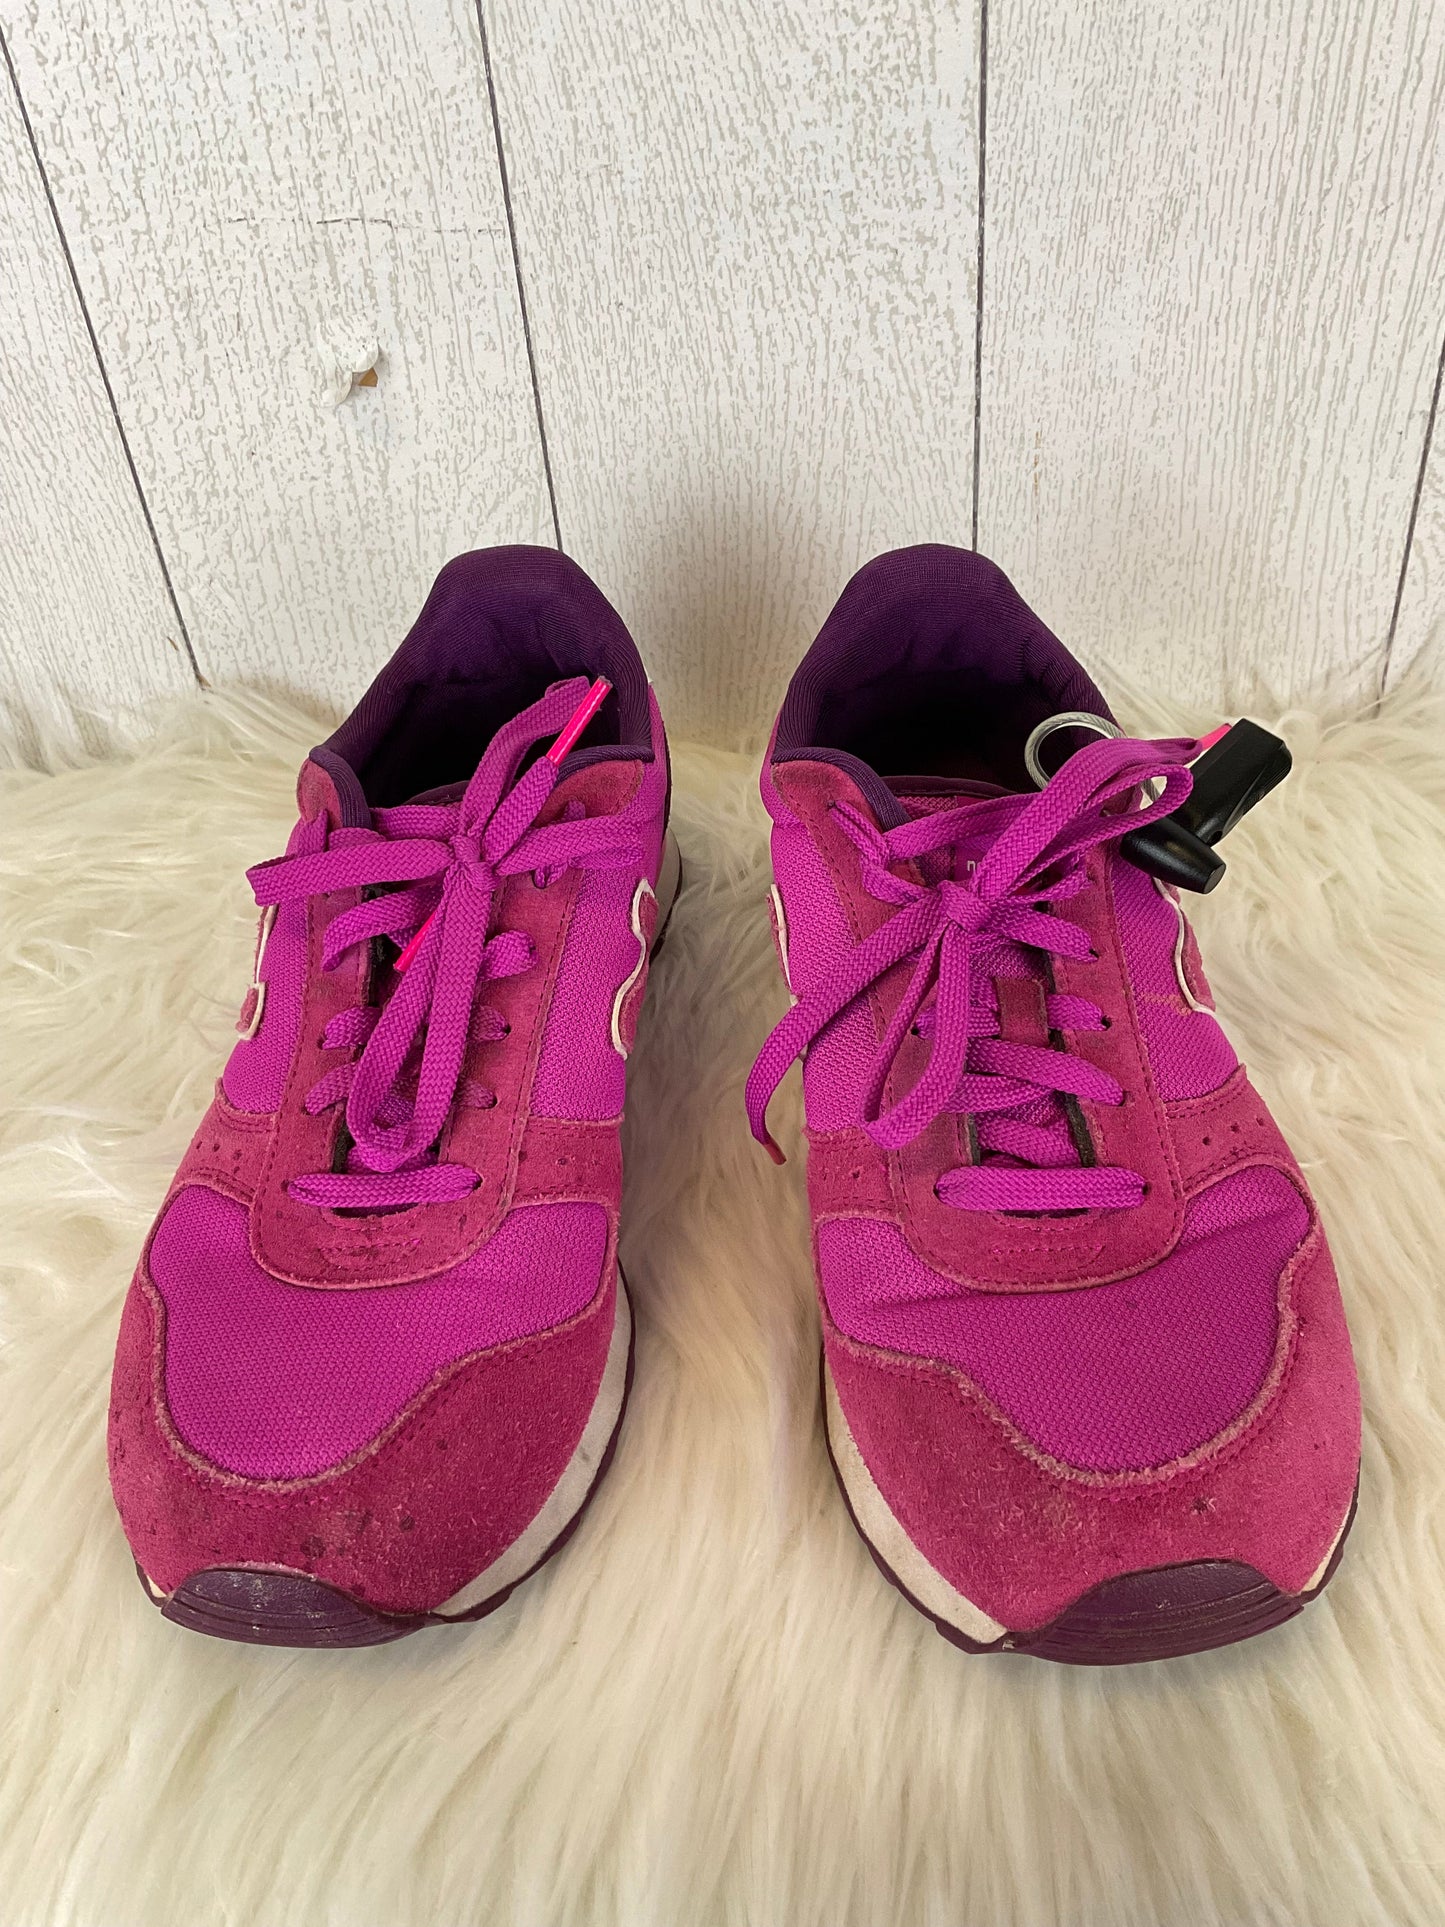 Pink & Purple Shoes Sneakers New Balance, Size 10